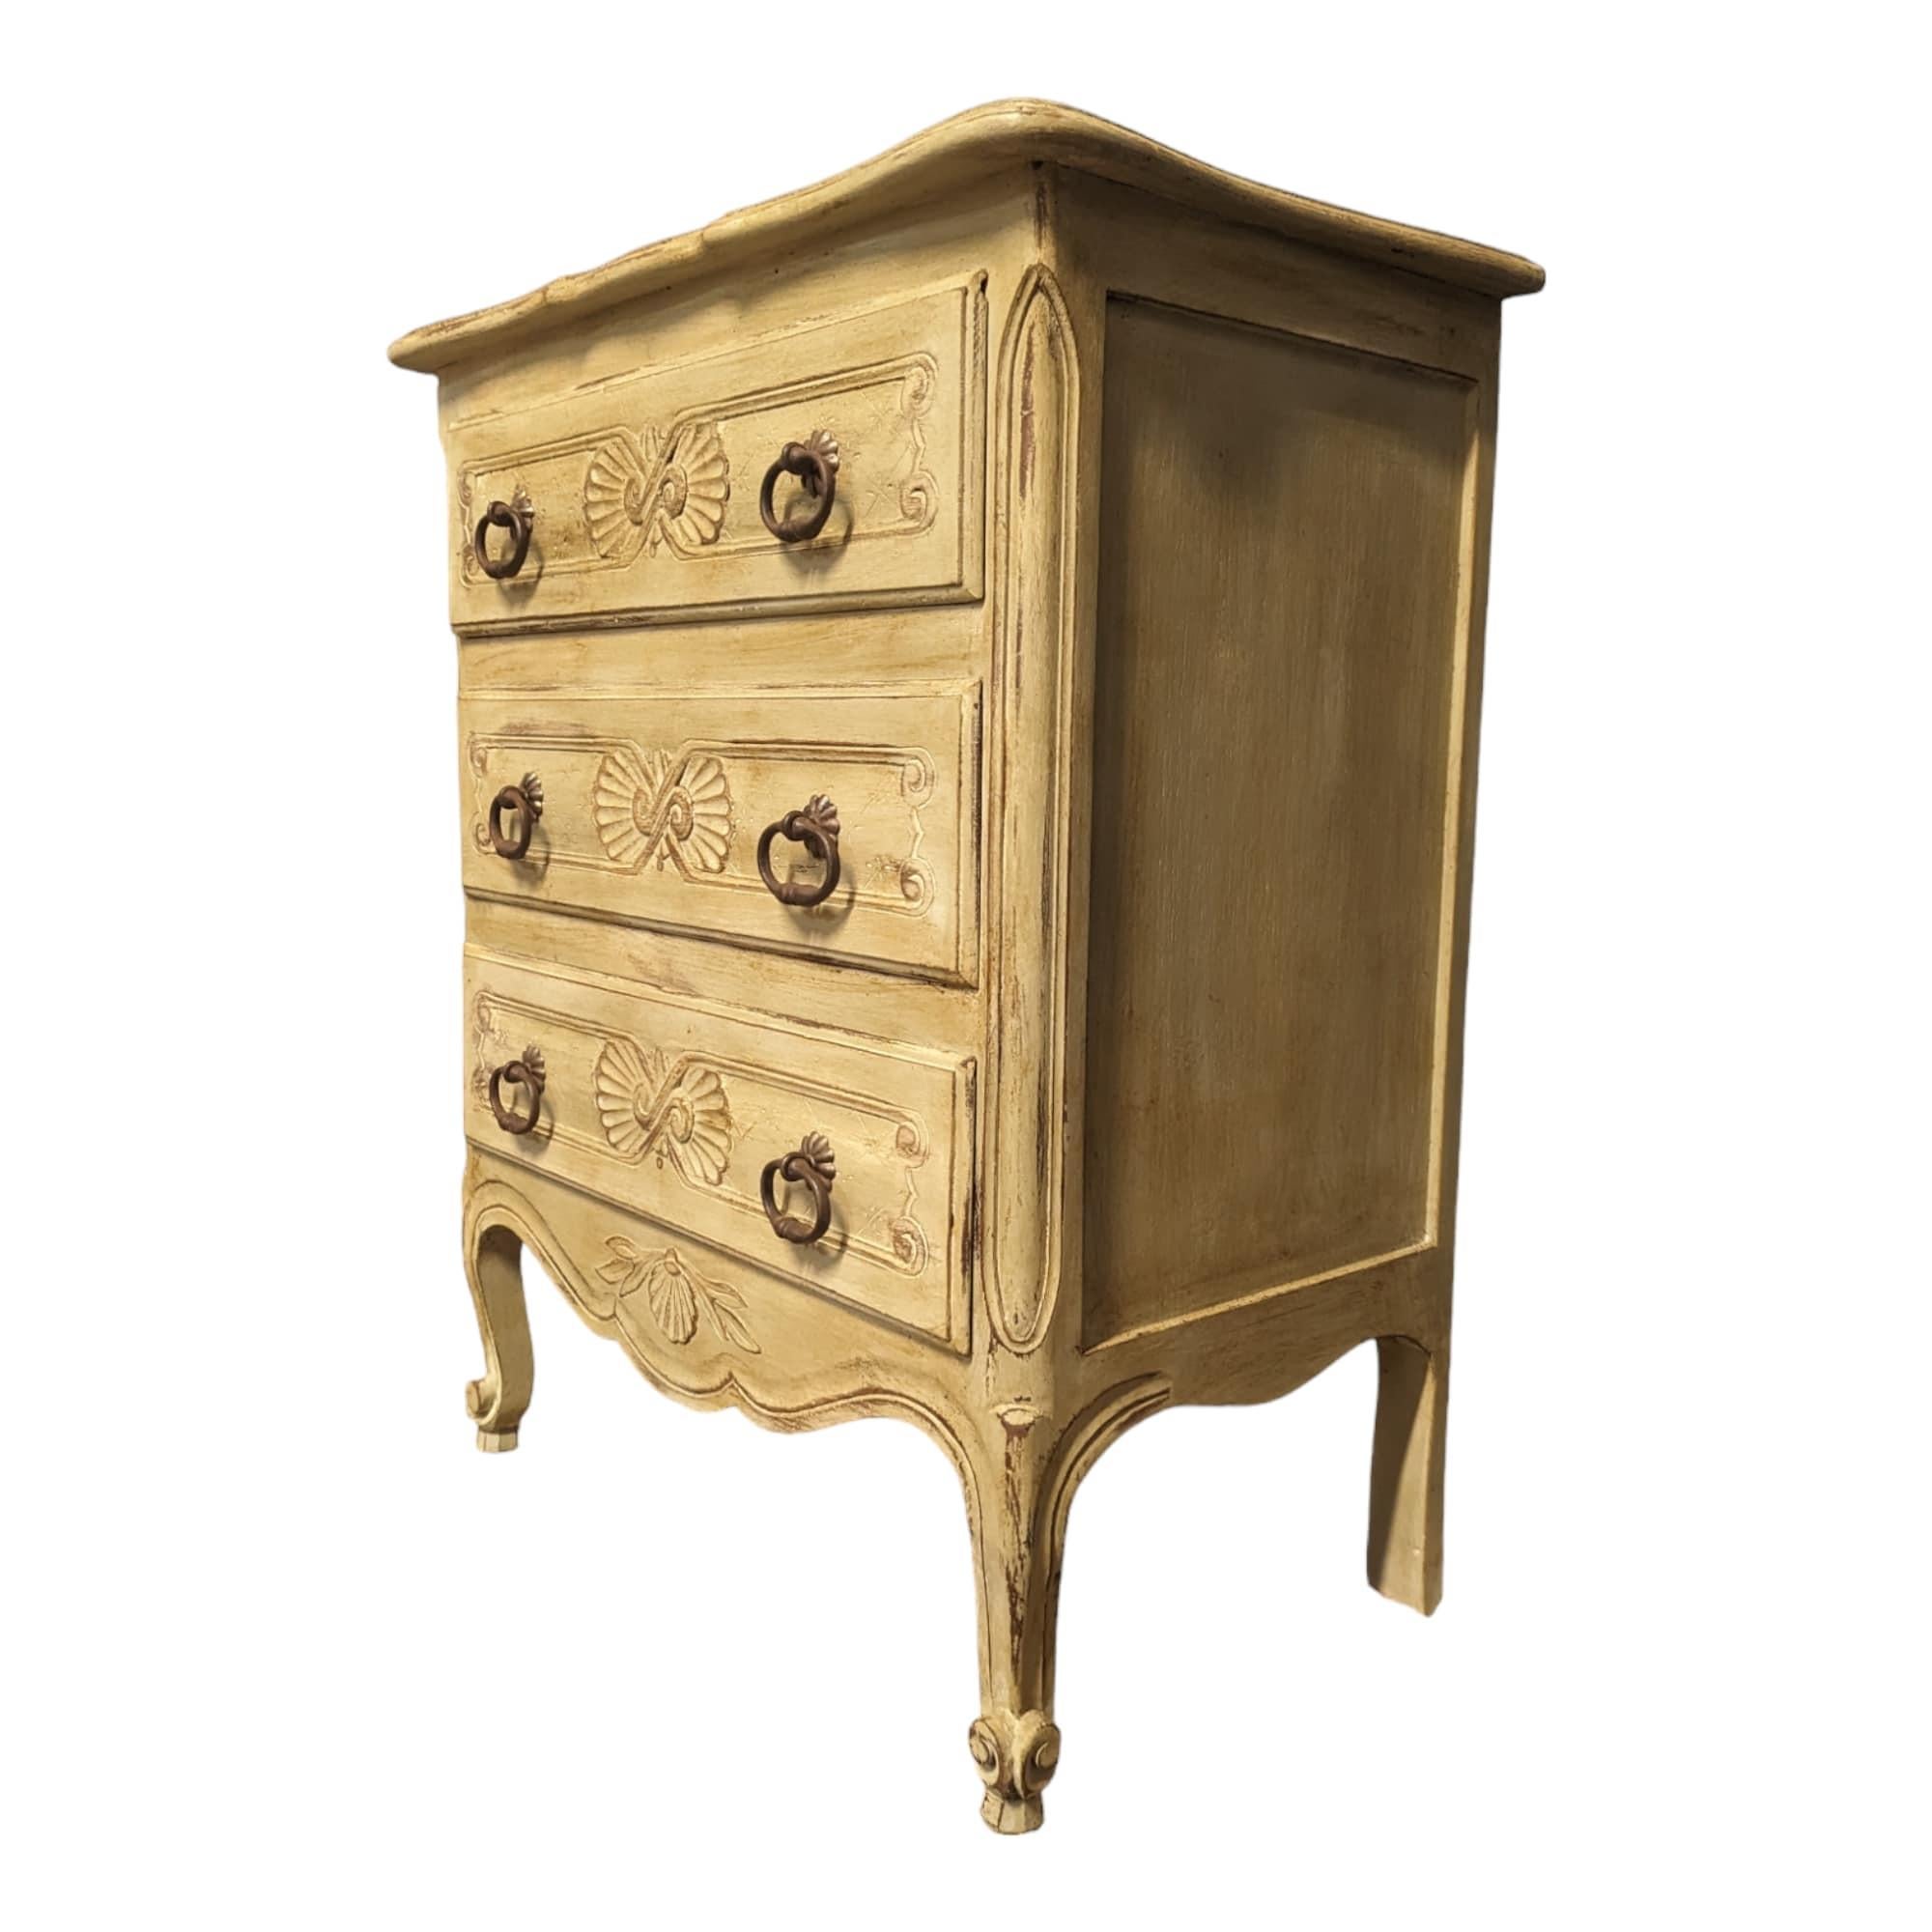 Coming from France. Discover the classic elegance of the Louis XV style with this magnificent patinated entryway chest of drawers, a remarkable example of French craftsmanship.

Inspired by the flowing lines and delicate ornaments characteristic of